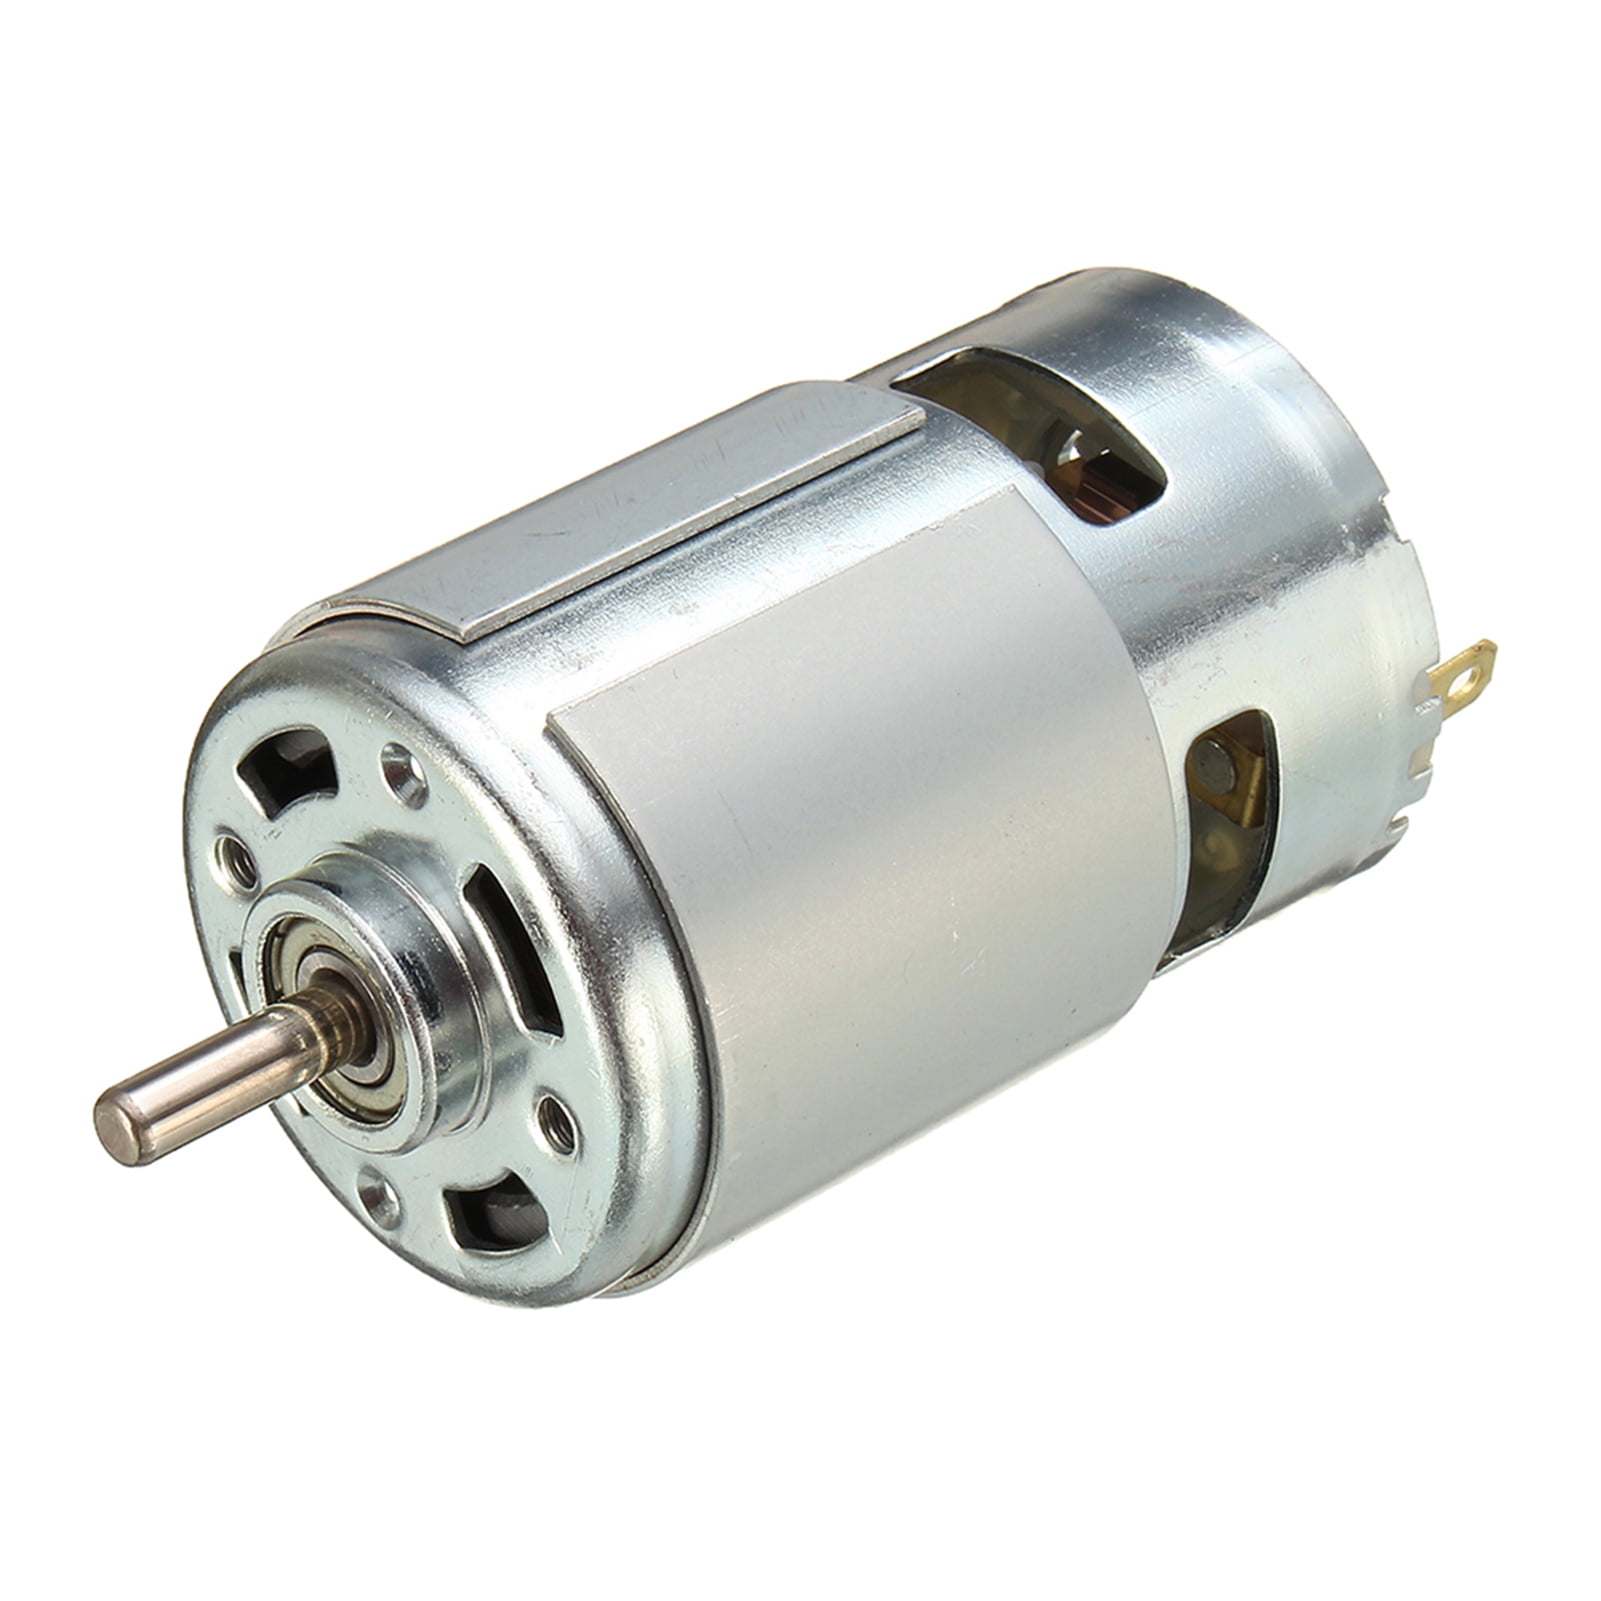 Details about   775 Motor 12V-36V High Speed DC 3500-9000 RPM Ball Bearing Large Torque 